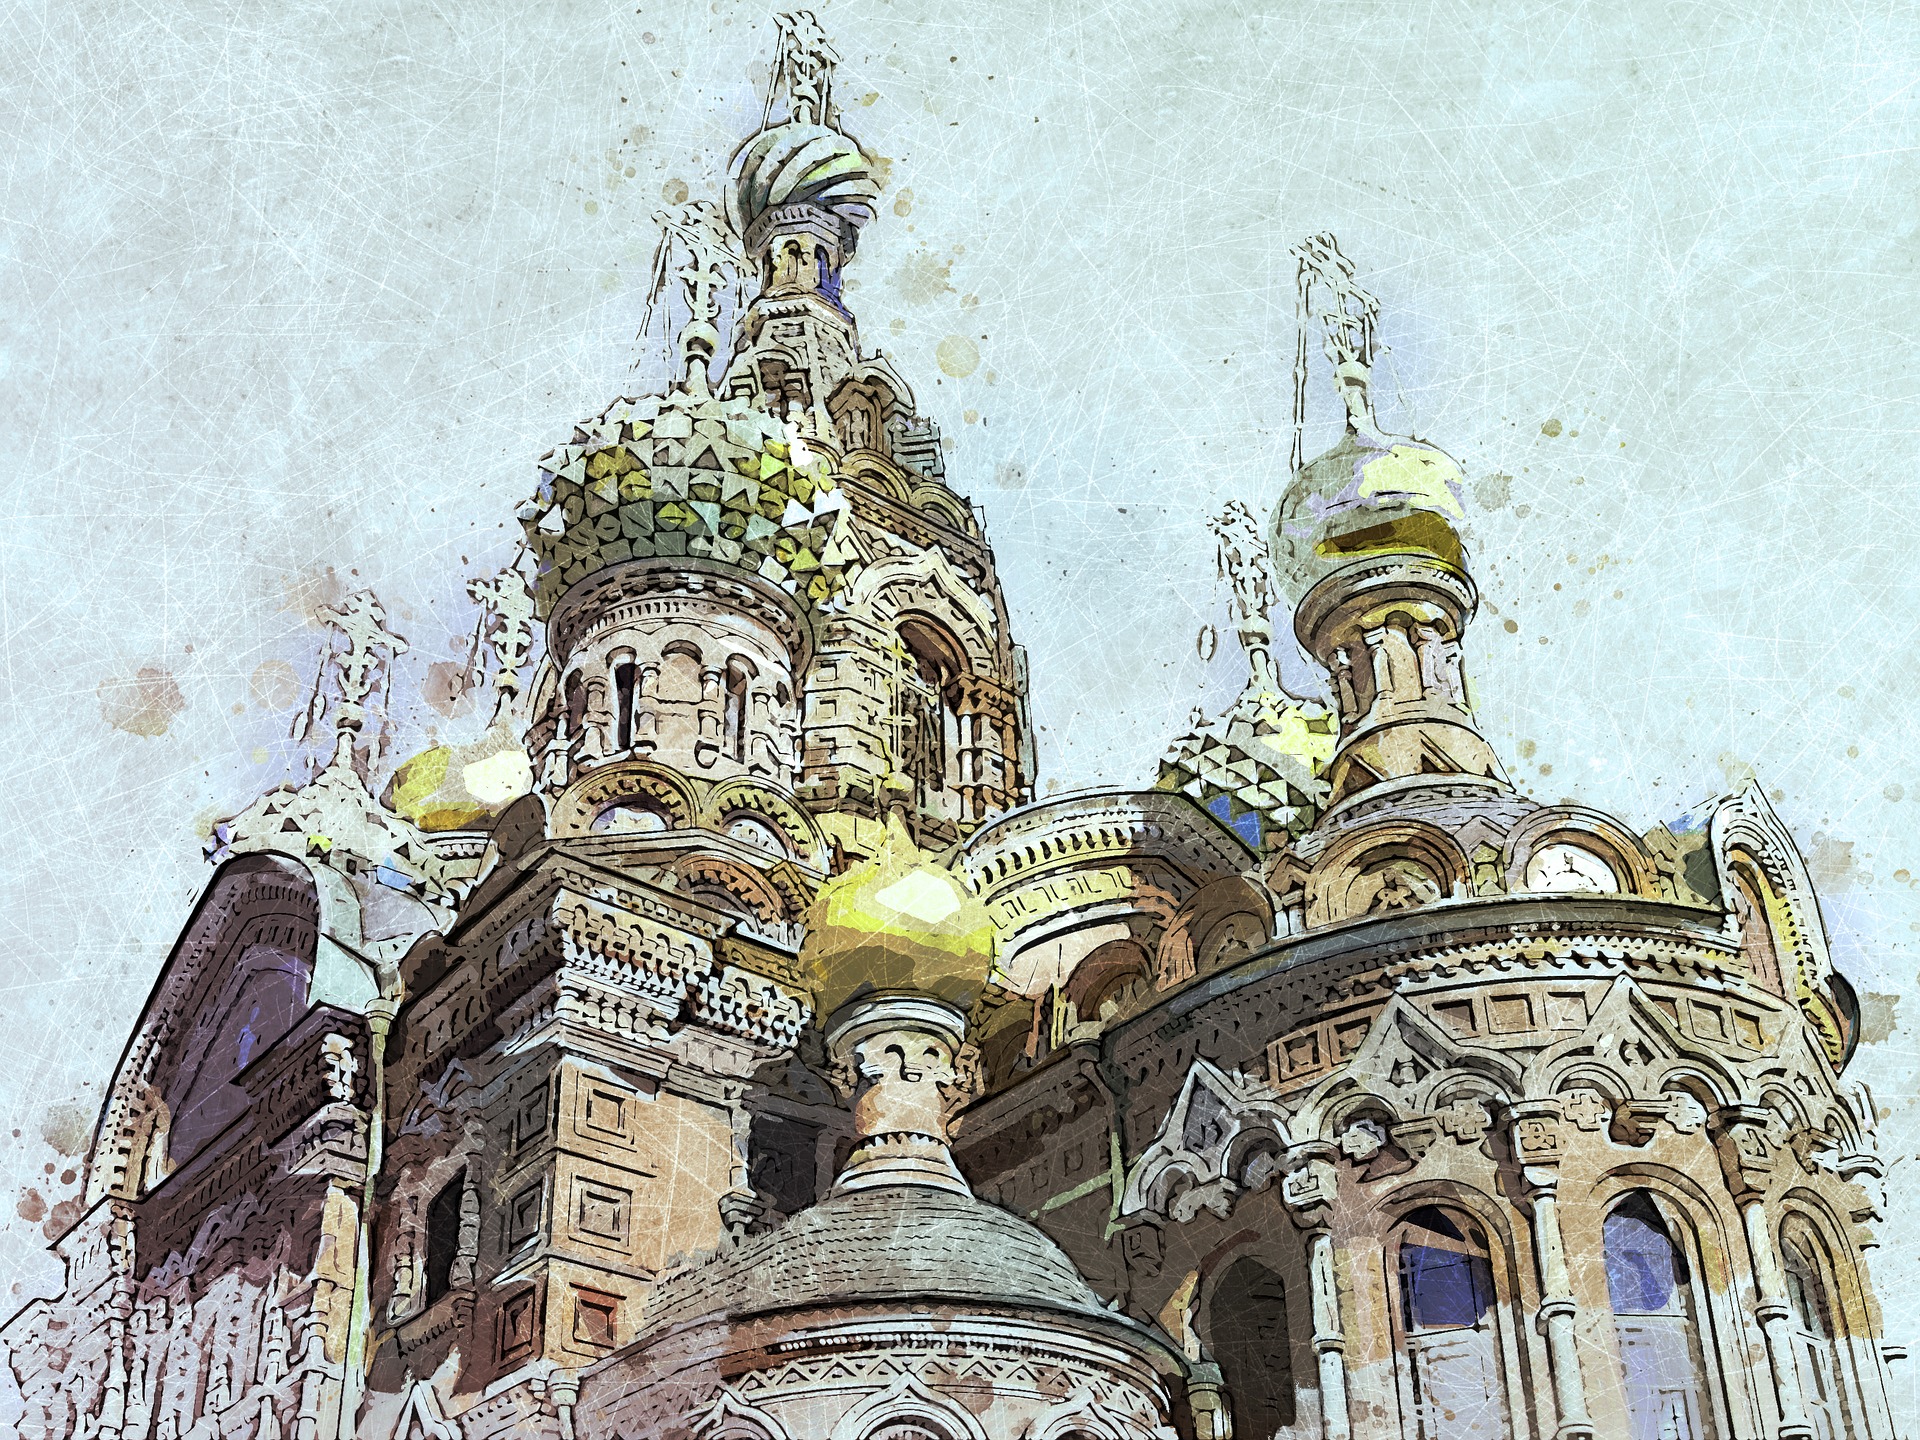 Image of St Petersburg cathedral